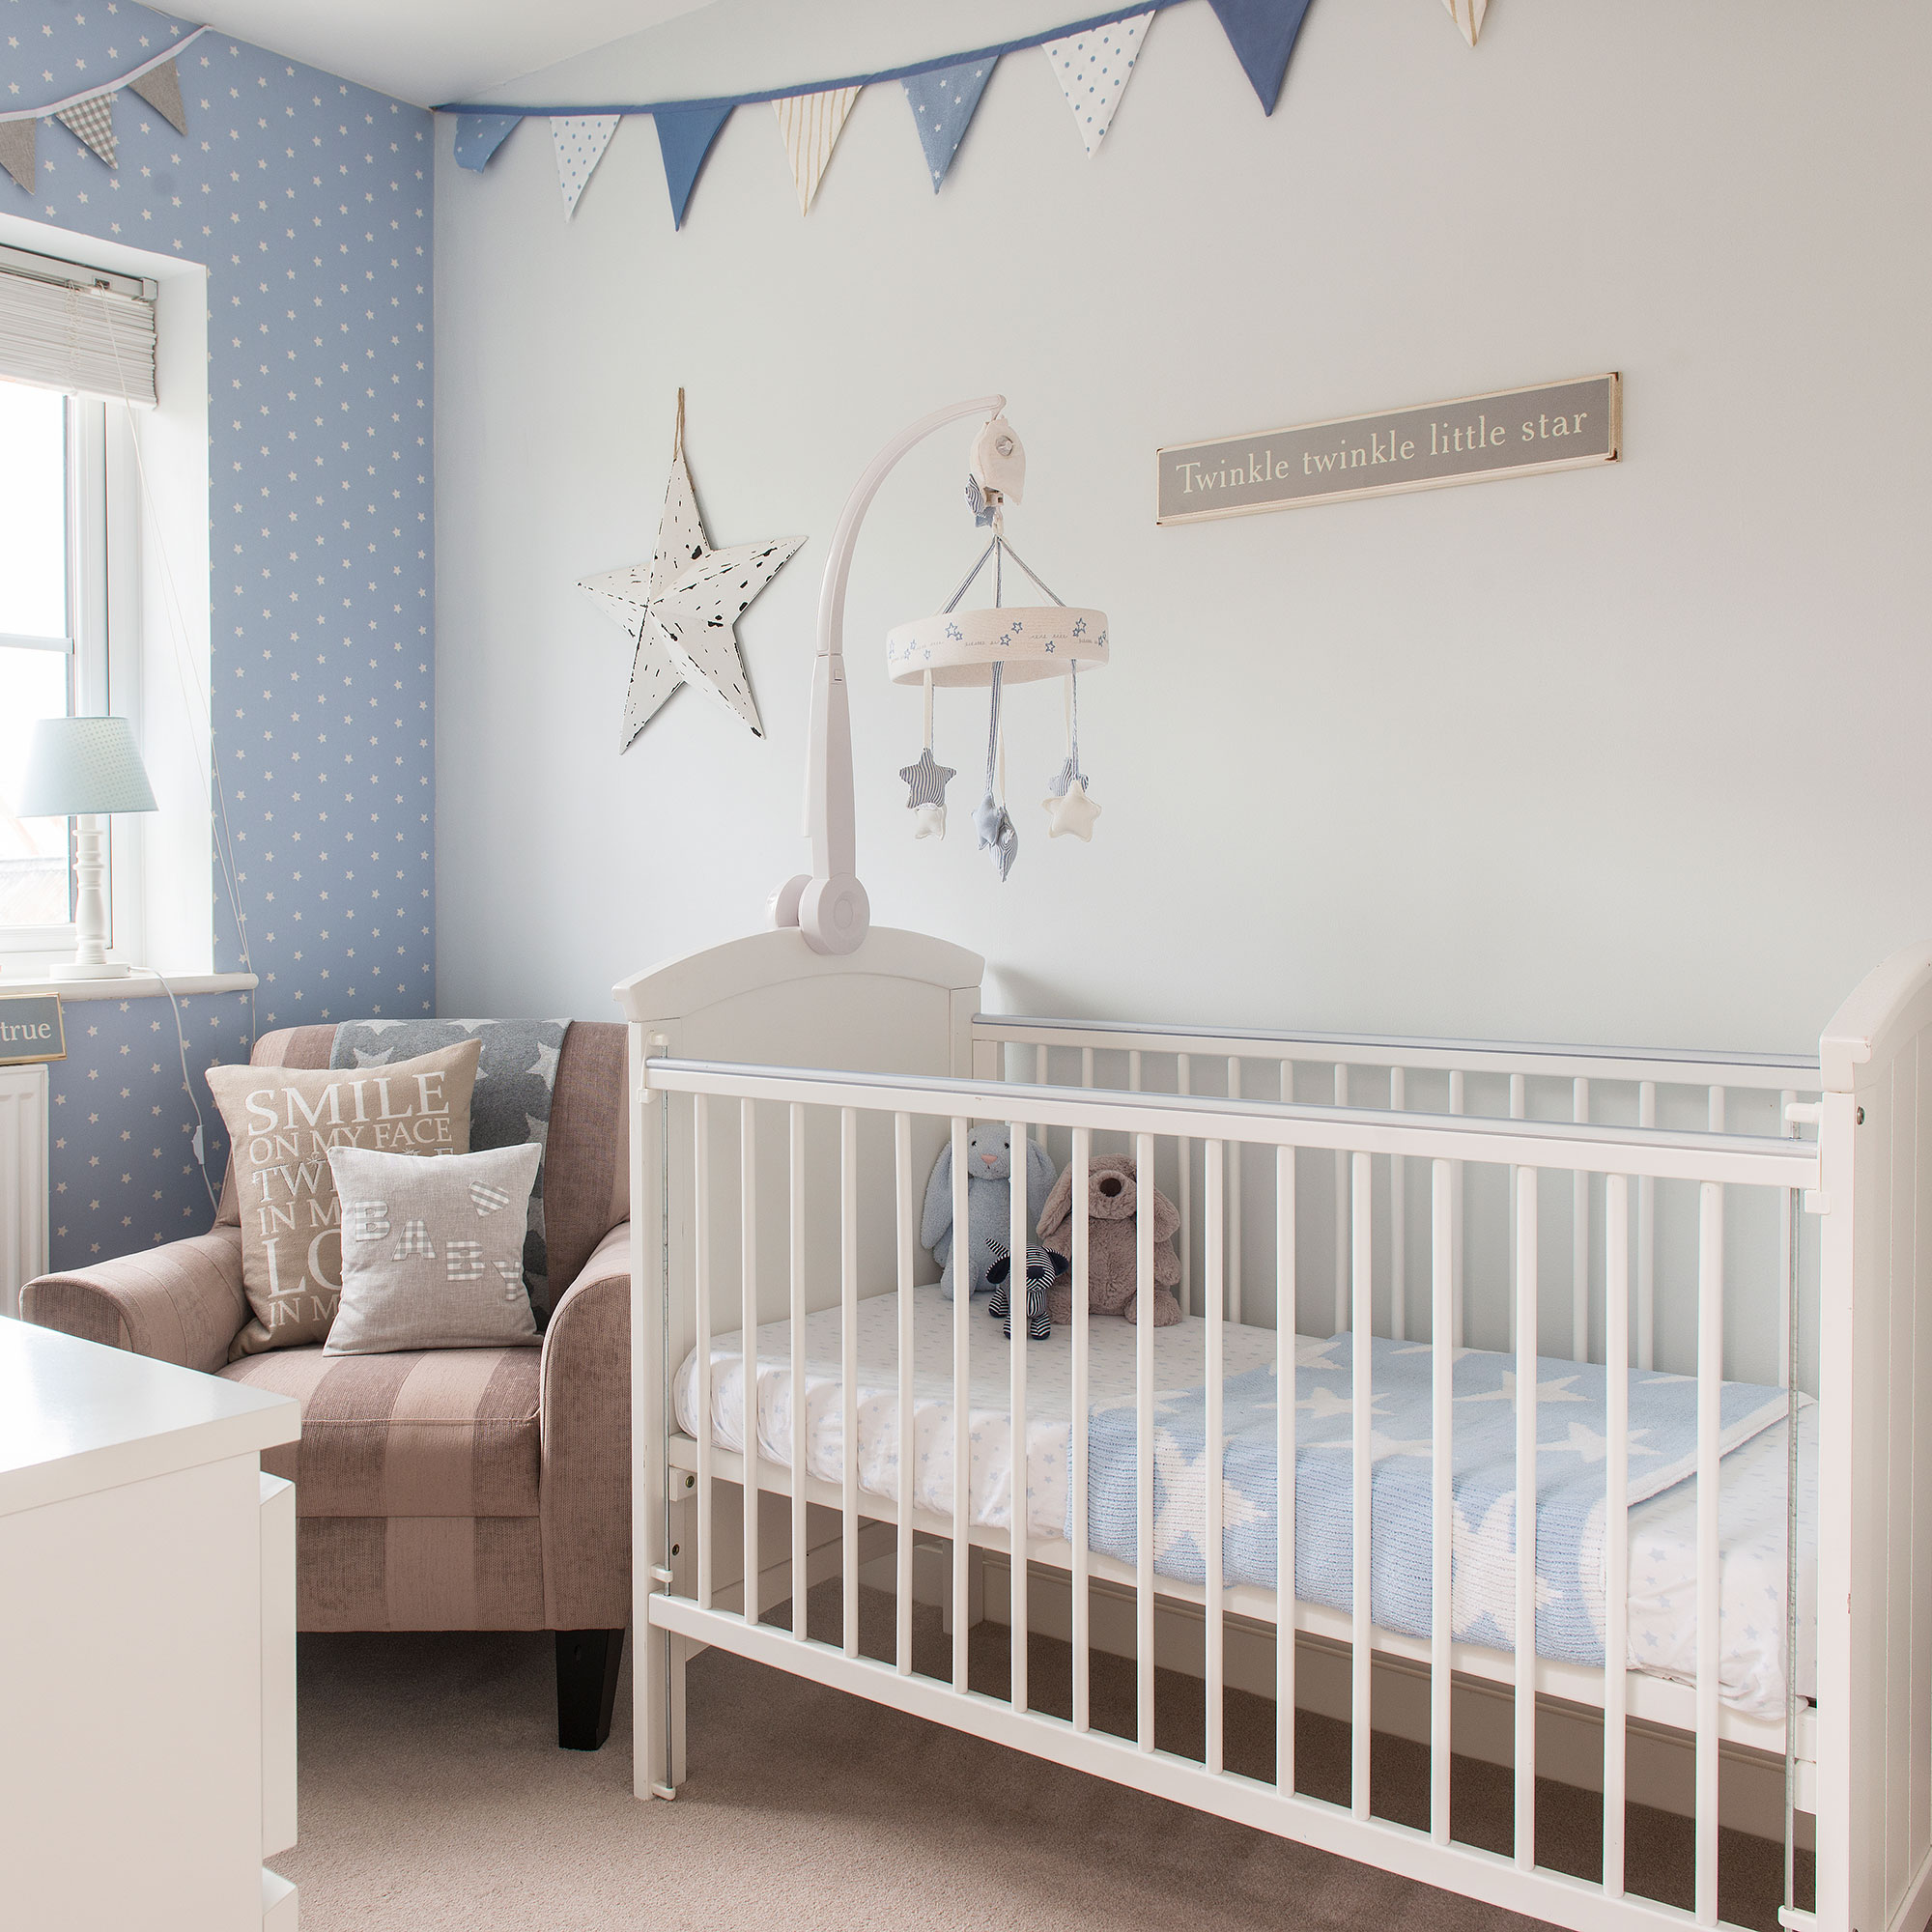 Nursery with white and blue walls, white crib and patterned bunting